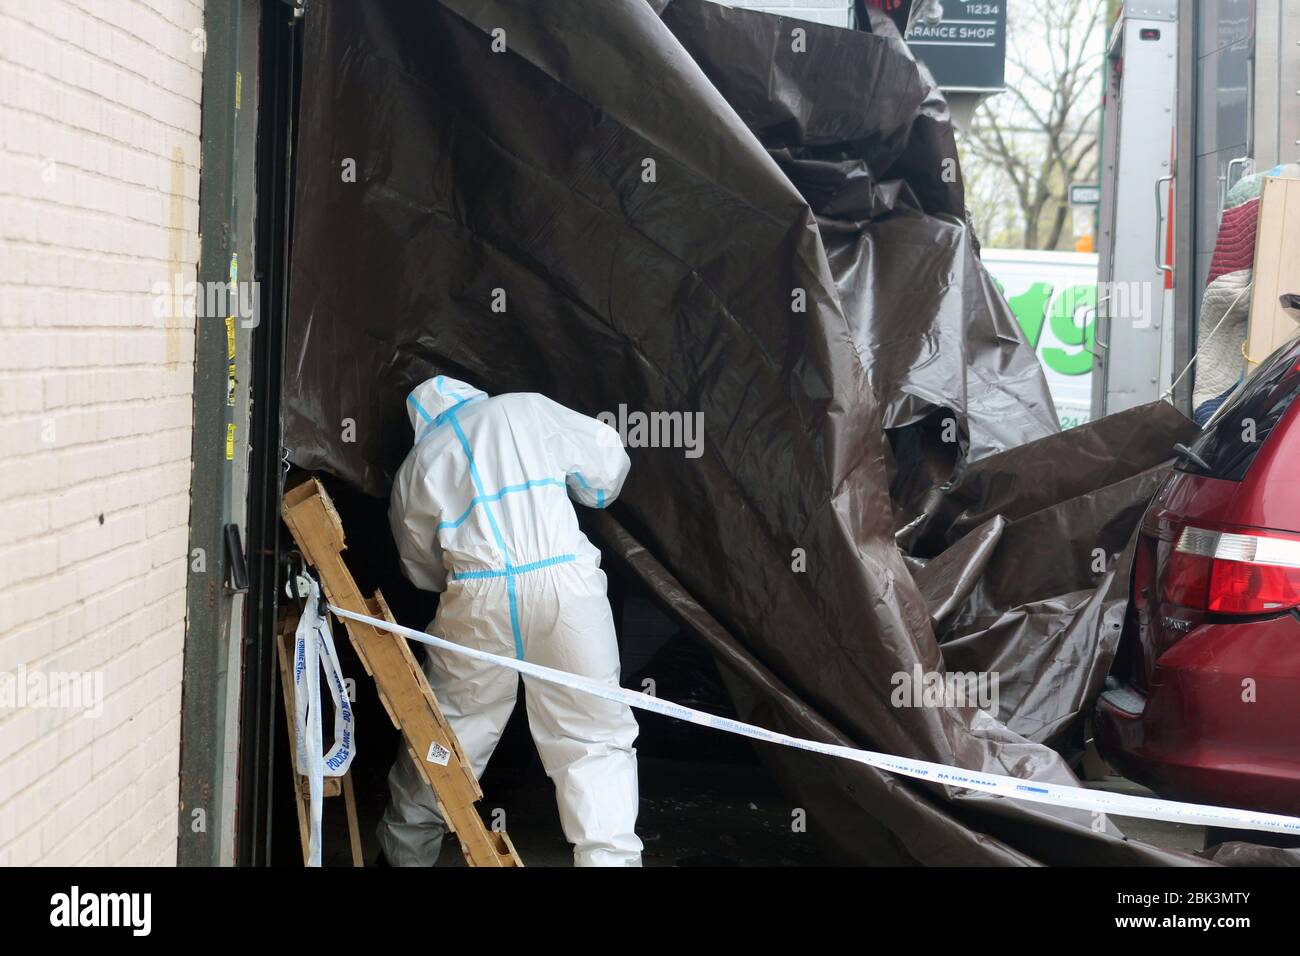 New York, New York, USA. 30th Apr, 2020. A worker dressed in a hazmat rushes under the brown tarp set up from the back of a truck to the entrance of the Andrew T. Cleckley Funeral Home in Brooklyn where bodies non properly cared are removed. 60 corpses were stored in 4 non-refregerated rented vehiciles lining the street along stores. Neighbors reported a foul smell and fluids dripping from the trucks. The funeral home was overwhelmed by COVID-19 deaths and ran out of room for bodies, which were awaiting cremation in New York. Credit: Marie Le Ble/ZUMA Wire/Alamy Live News Stock Photo